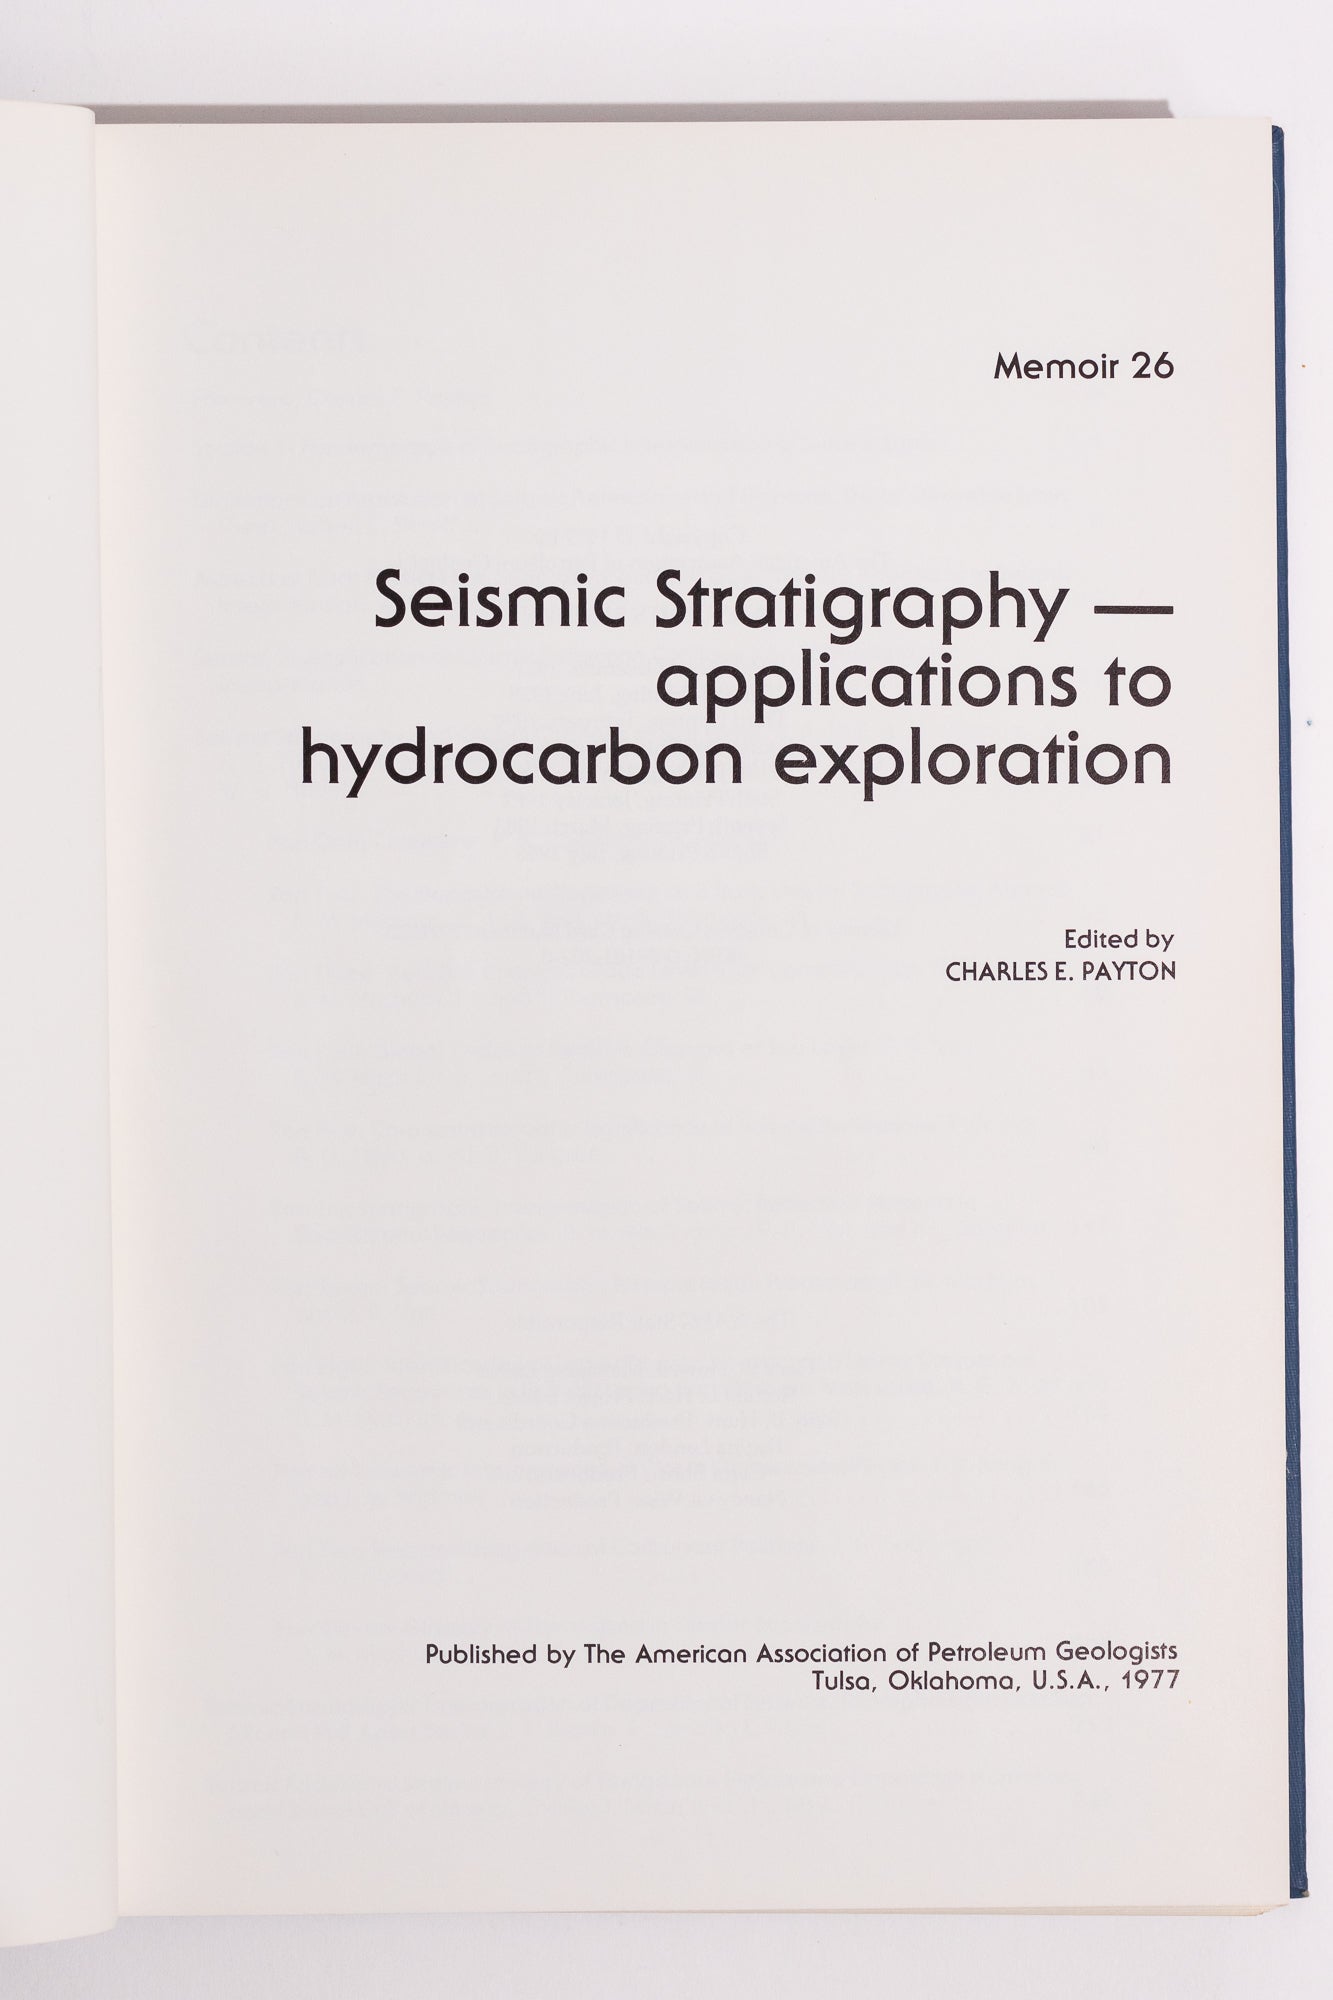 Seismic Stratigraphy- Applications to Hydrocarbon Exploration - Stemcell Science Shop